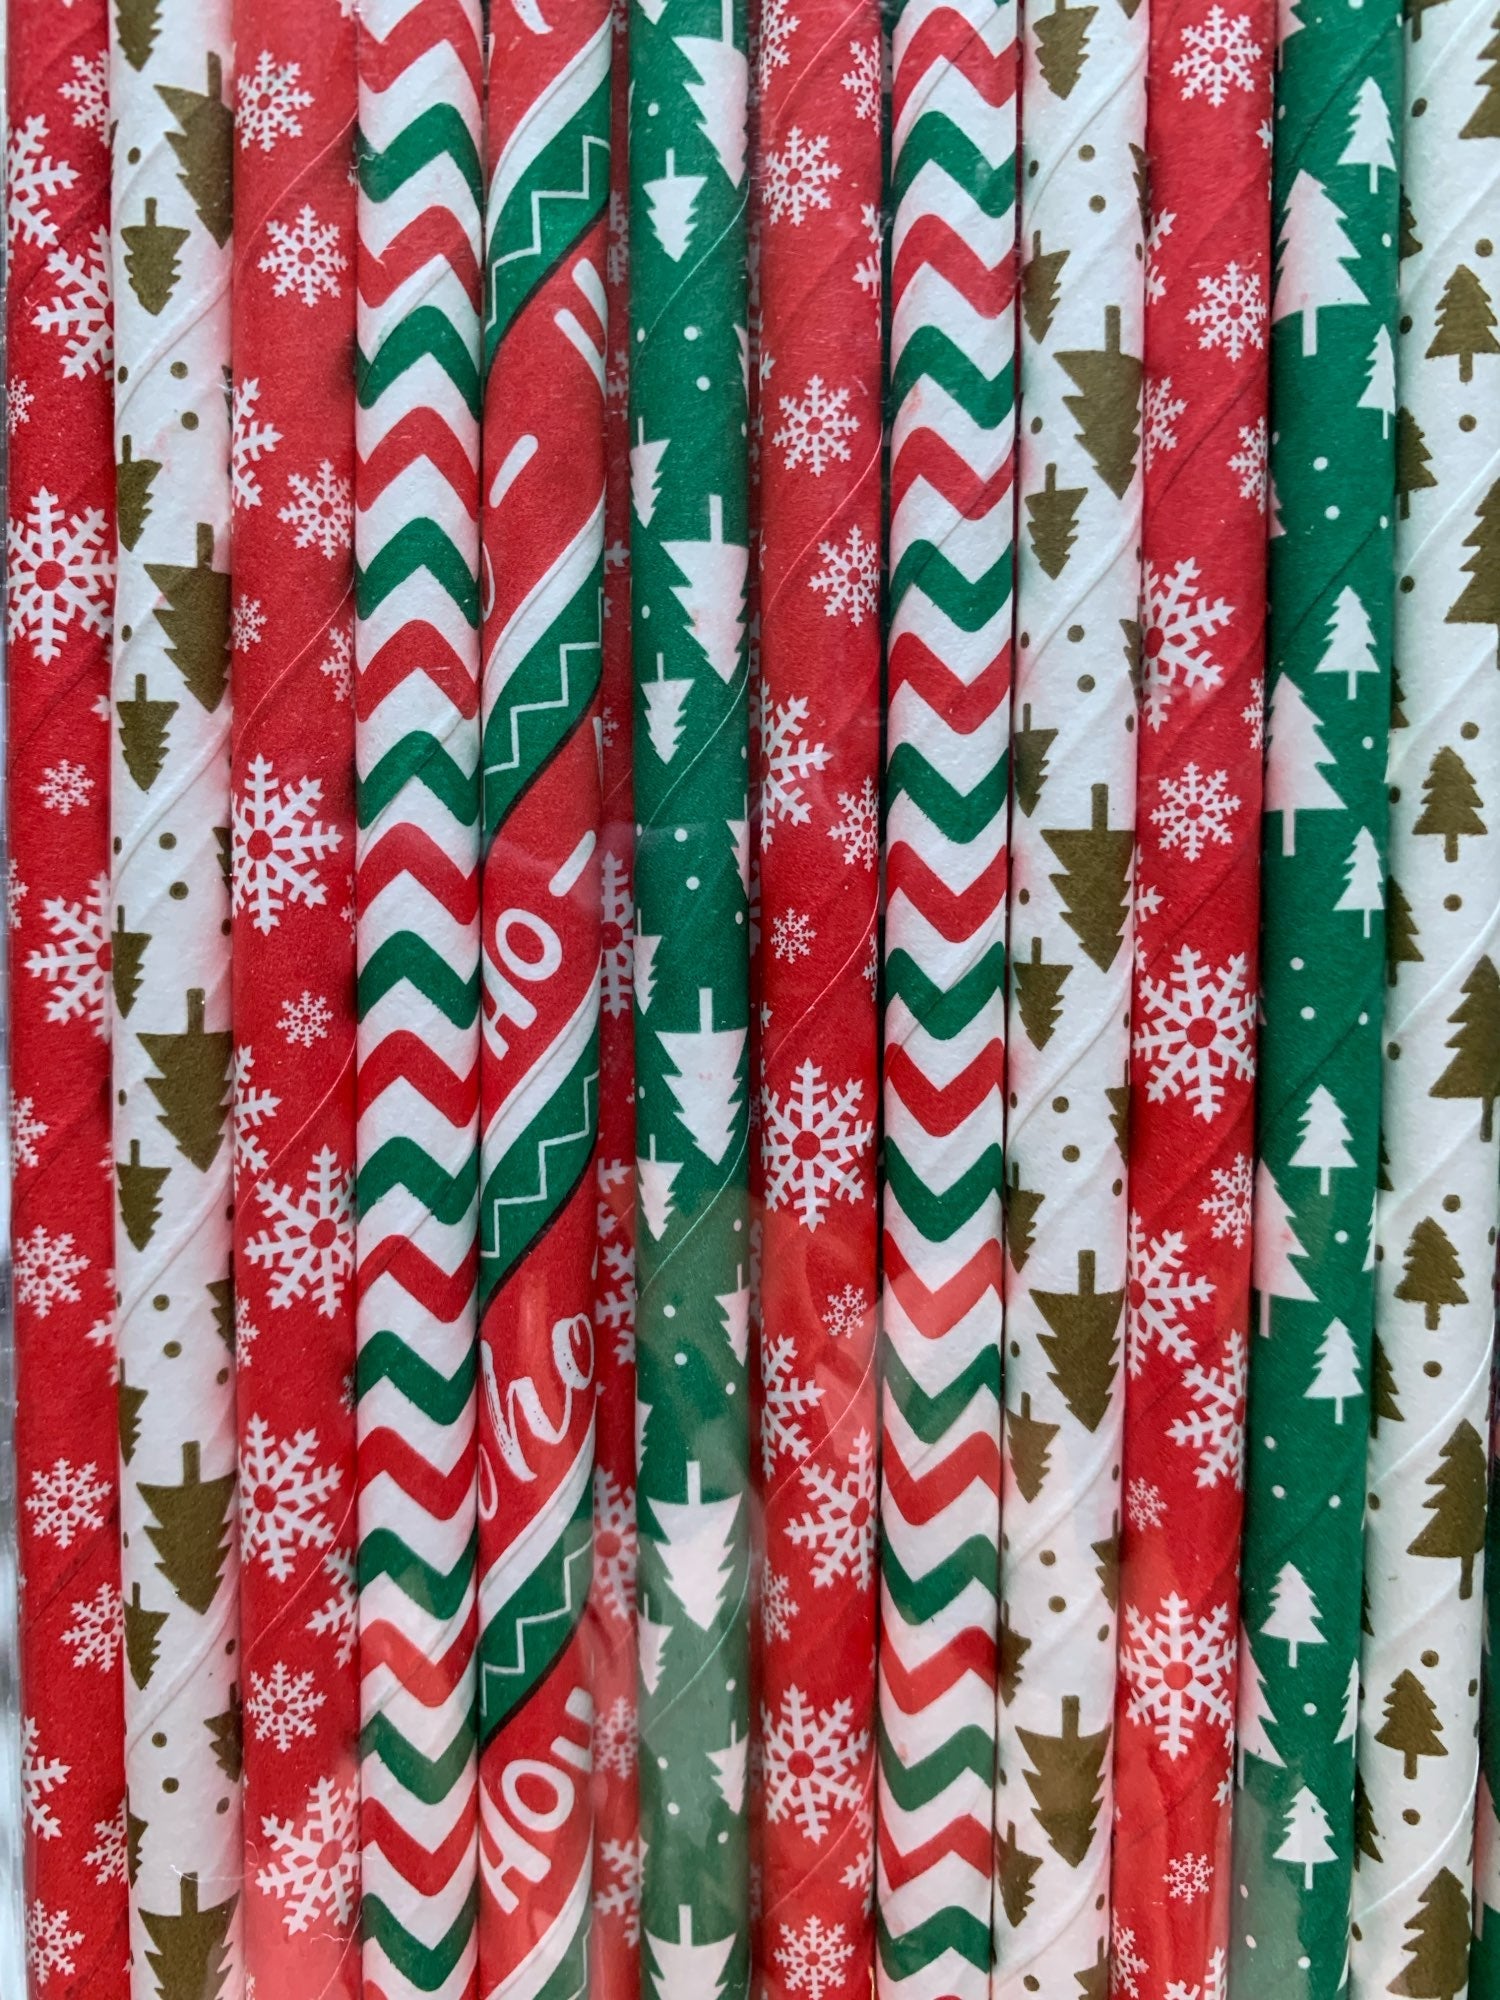 Christmas Straws Red Green Red Metallic Foil Stripes Snowman Straws  Christmas Party New Years Christmas Eve Dinner Metallic Straws 